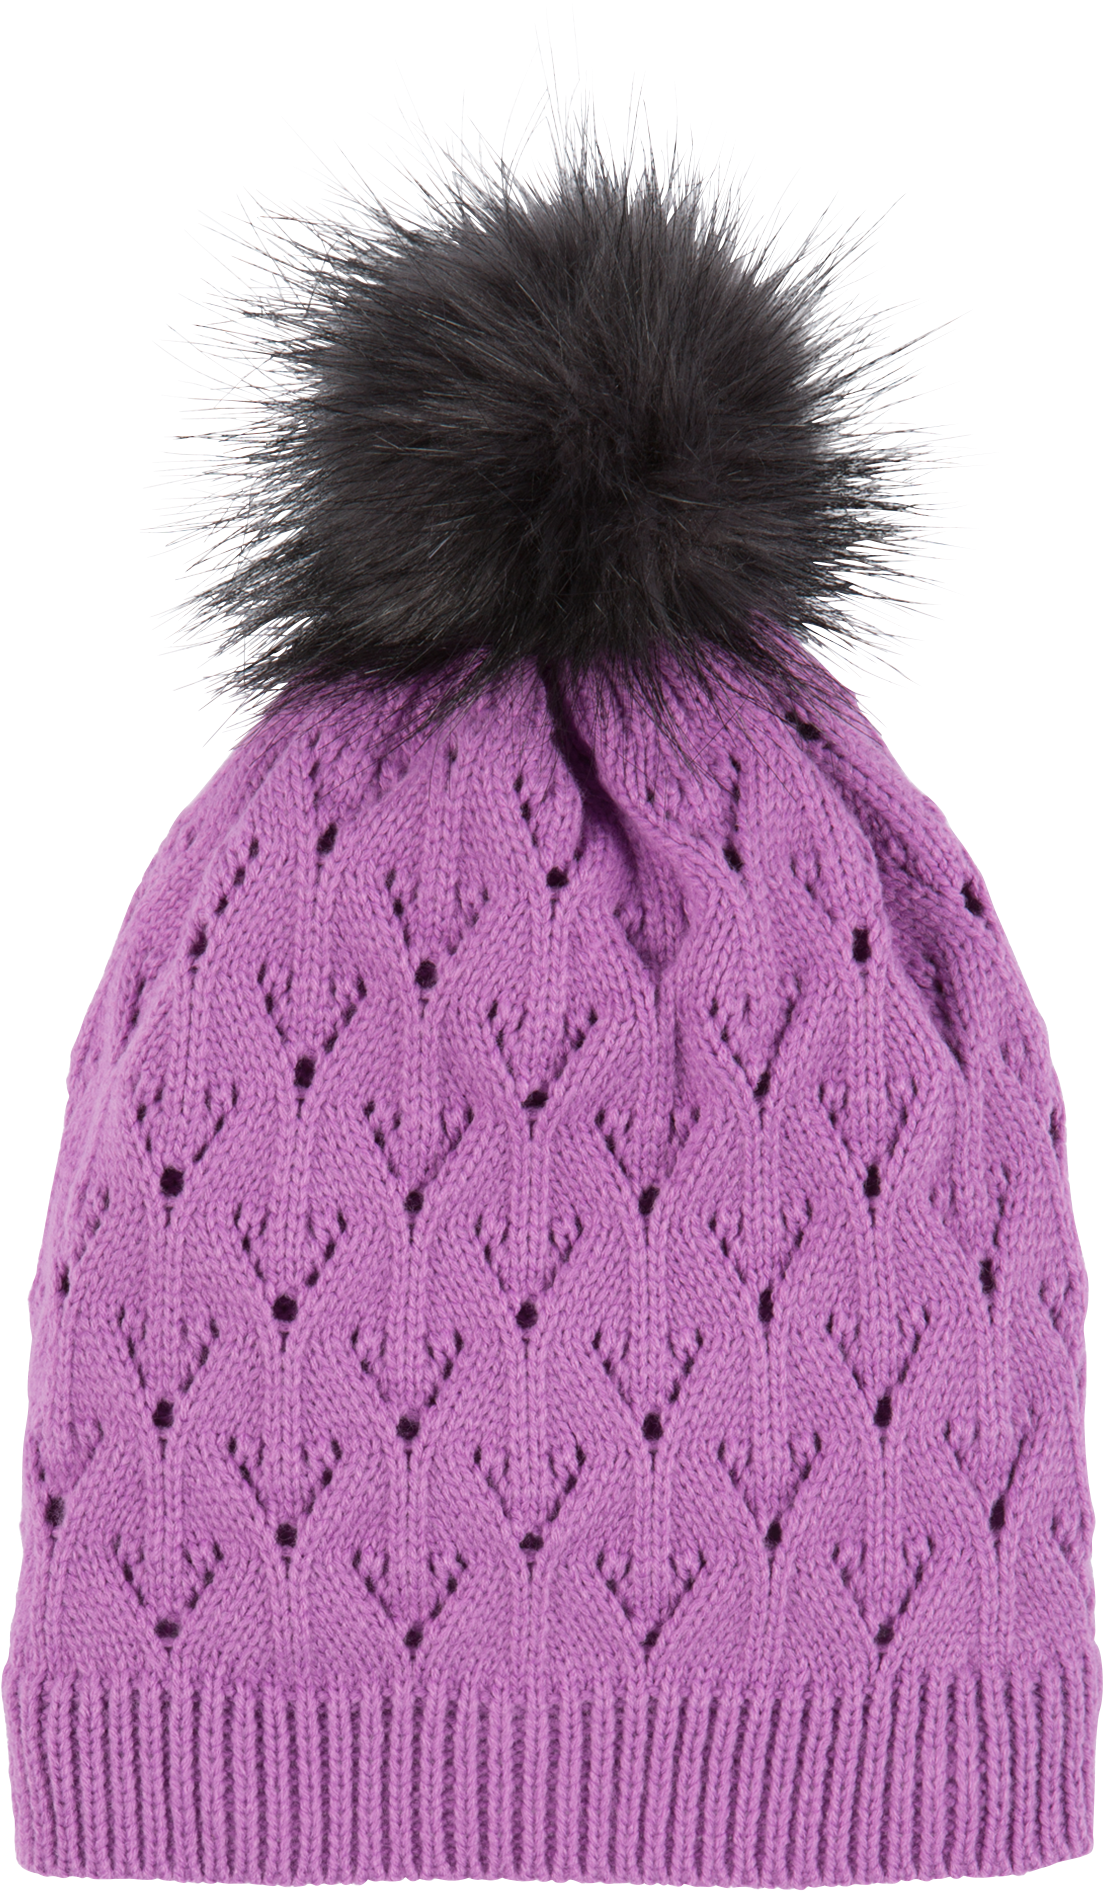 Hat Png Download Knit Cap Clipart Large Size Png Image Pikpng